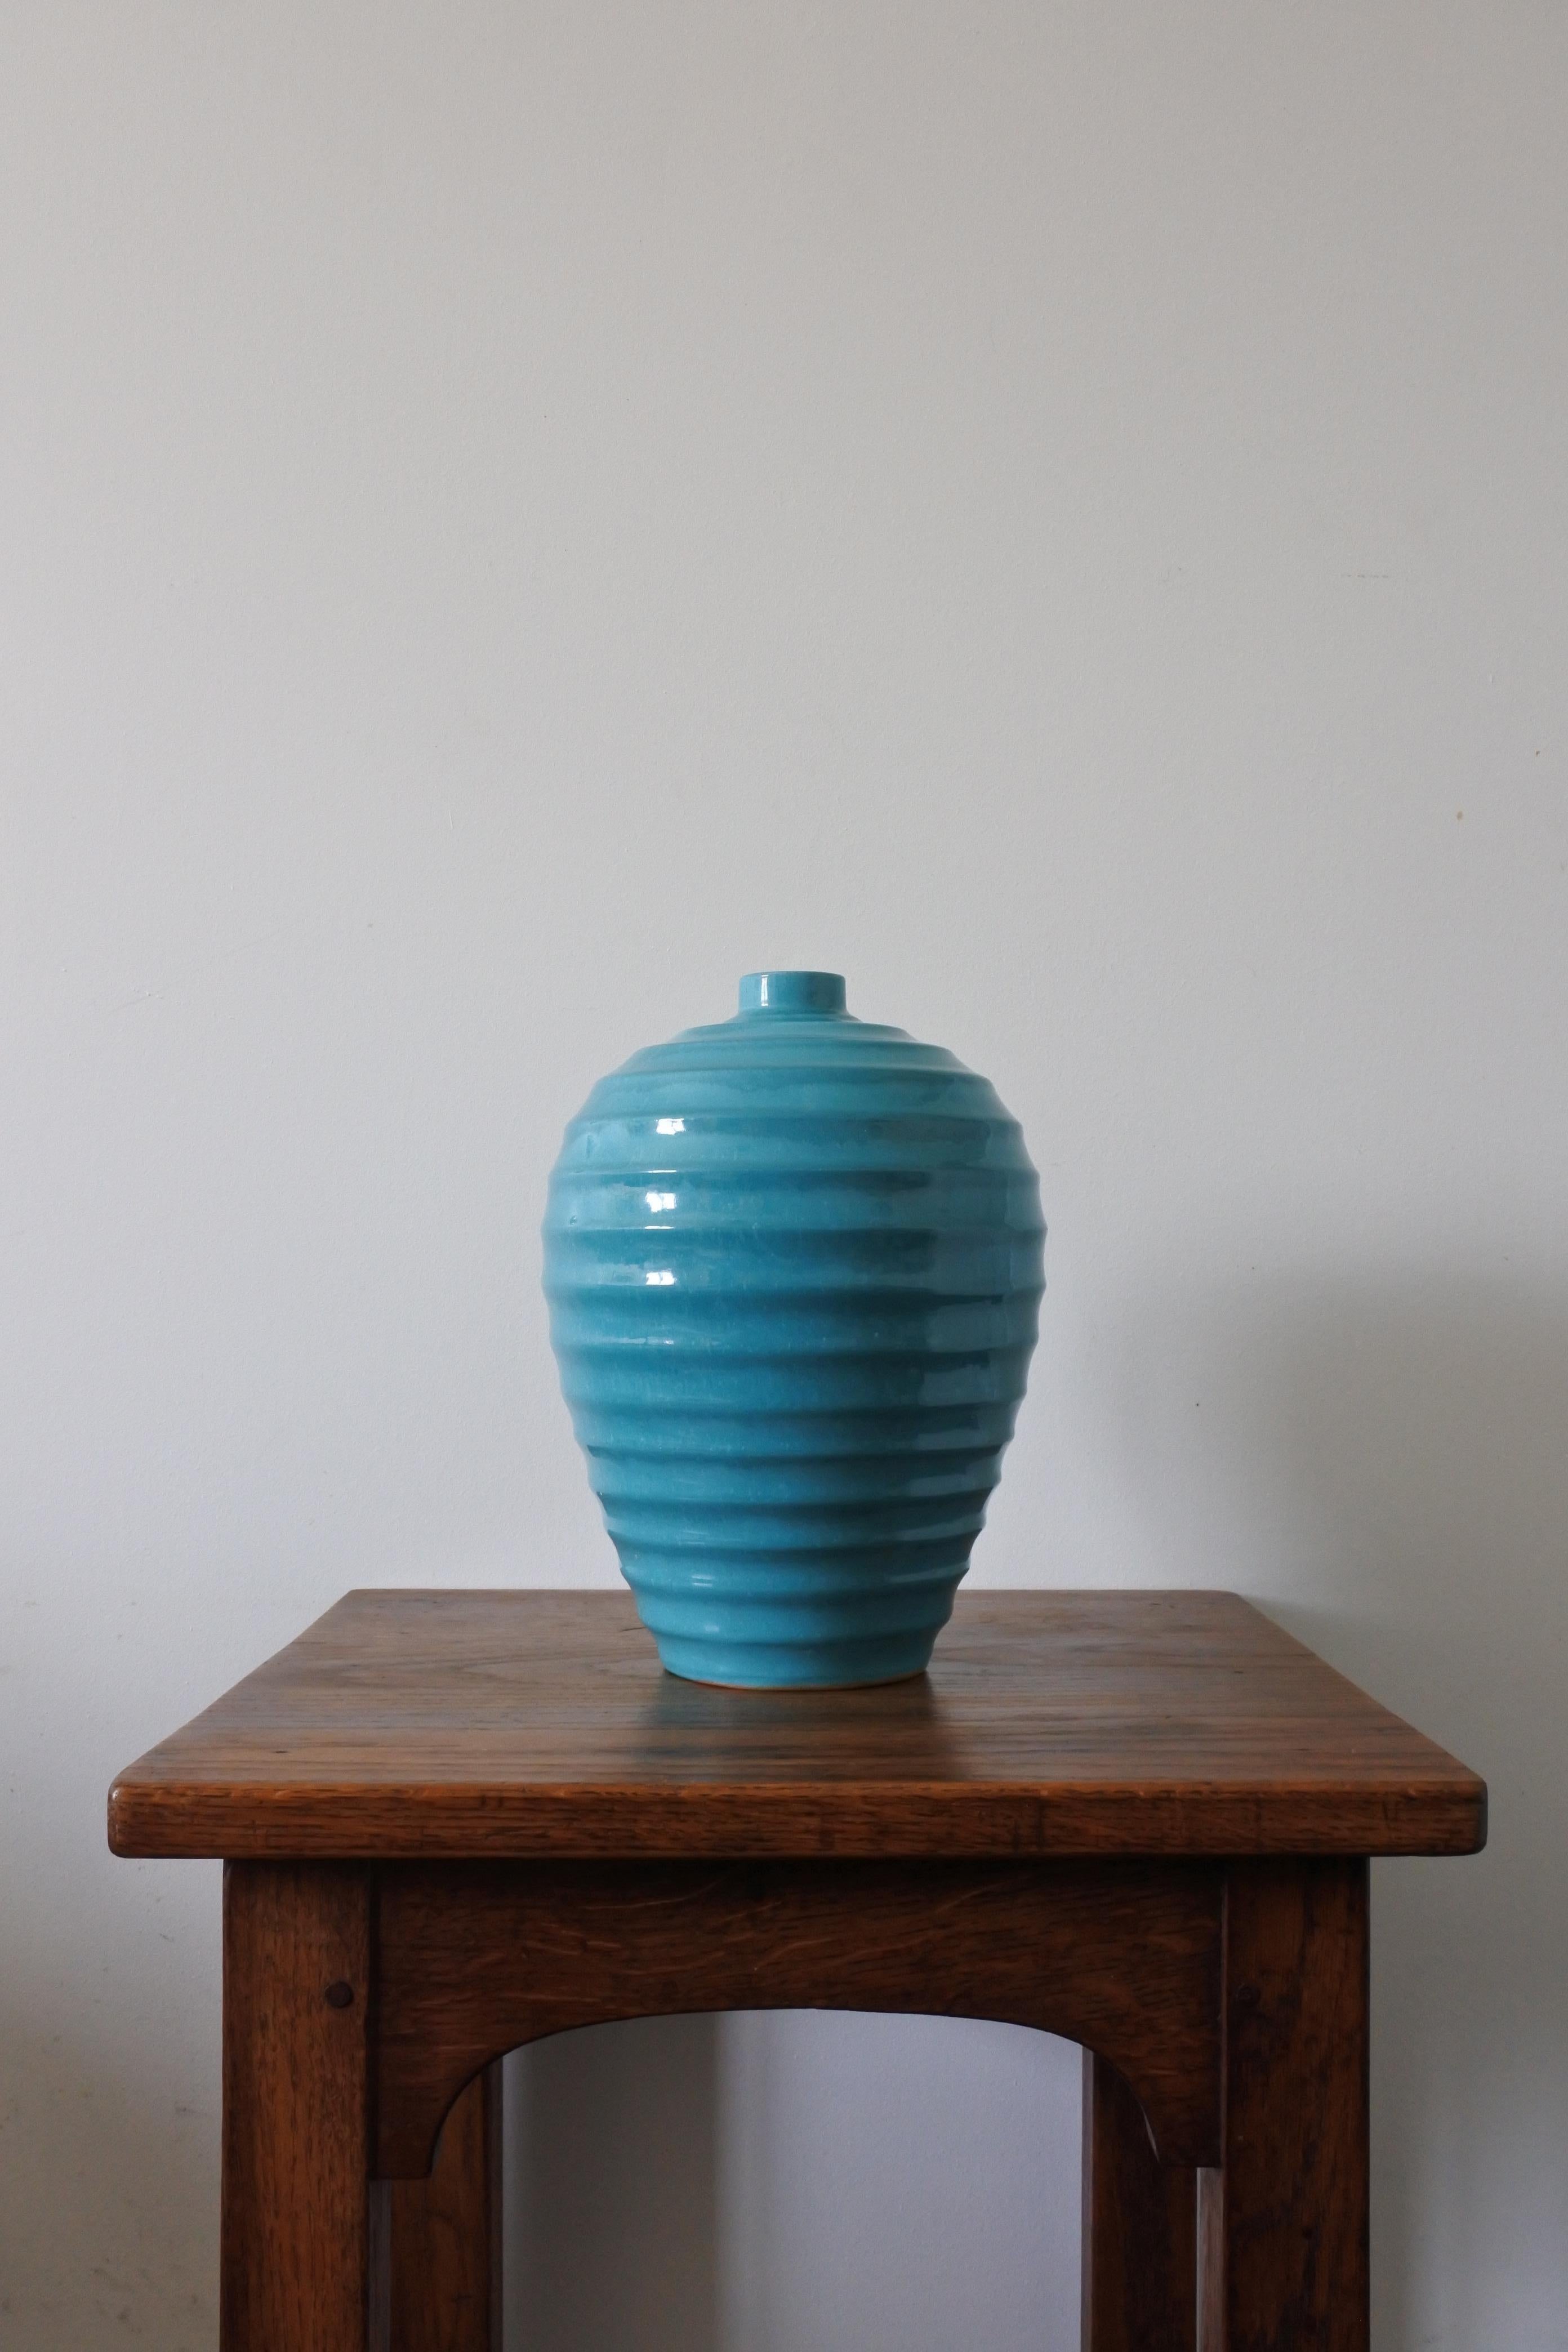 Large Art Deco ceramic vase by Primavera.
Made in France in the 1930s.
Deep turquoise blue glaze.
Stamped Made in France.

Atelier Primavera was the art studio of Le Printemps, renowned parisien department store.
Colette Gueden was the